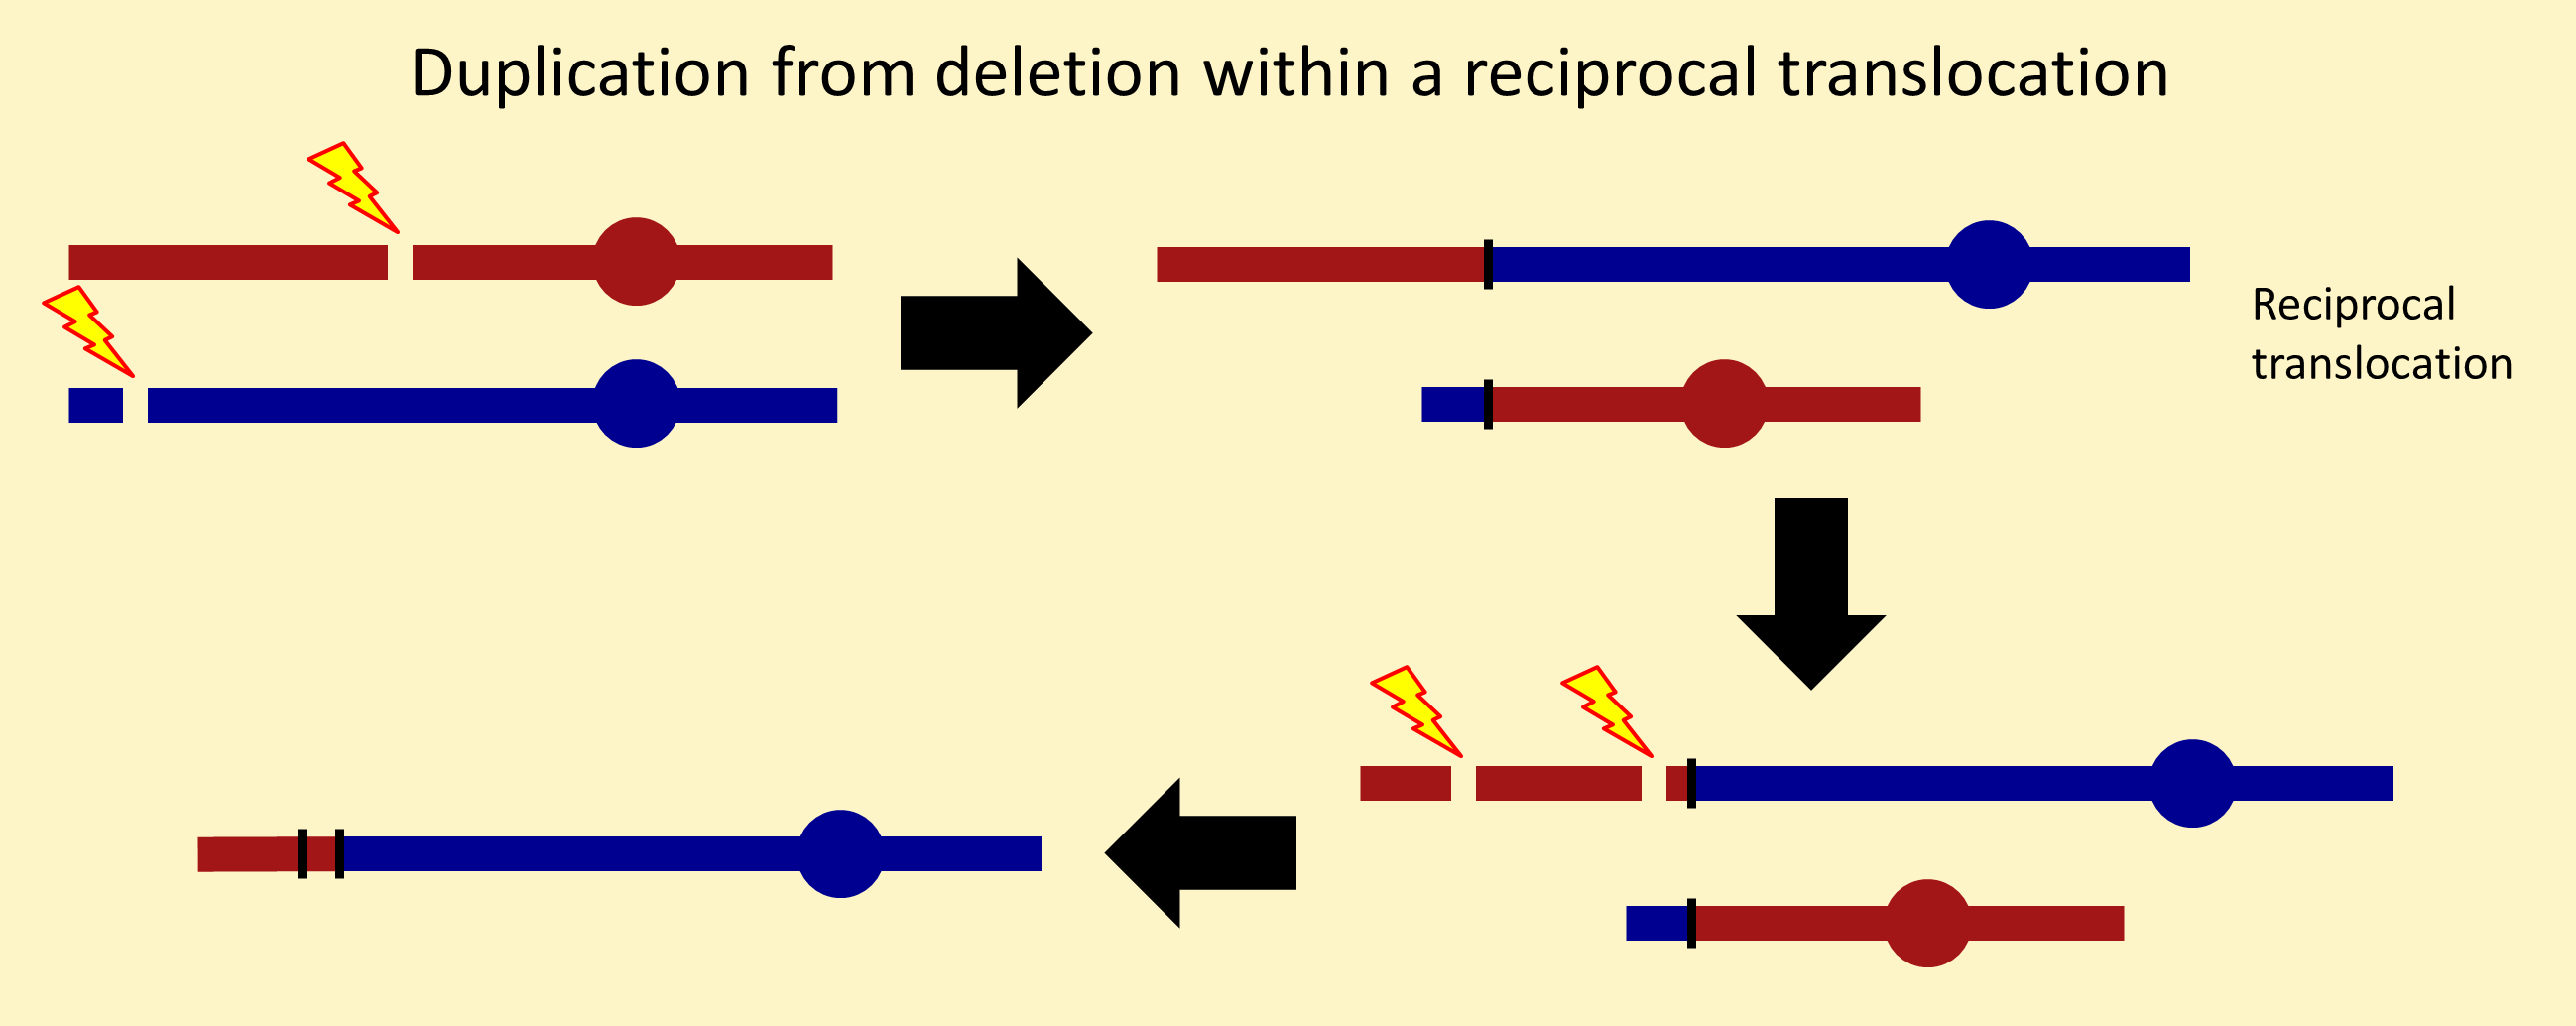 Duplication from deletion within a reciprocal translocation